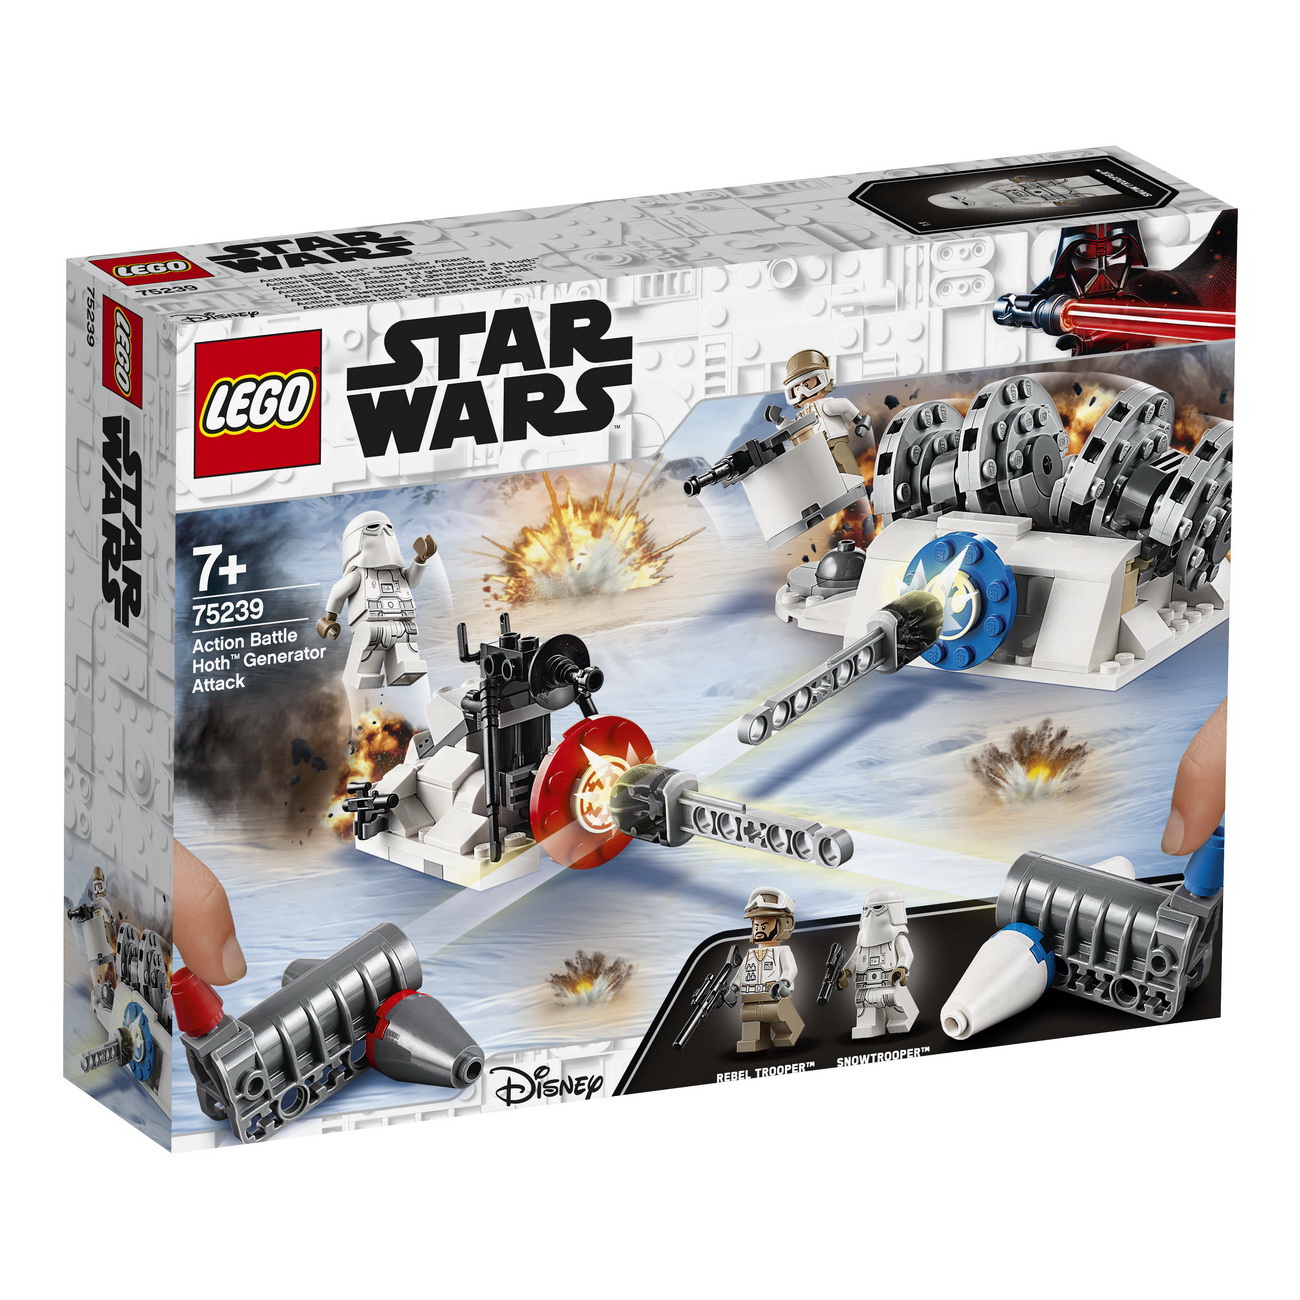 LEGO Star Wars 75239 - Action Battle Hoth Generator Angriff